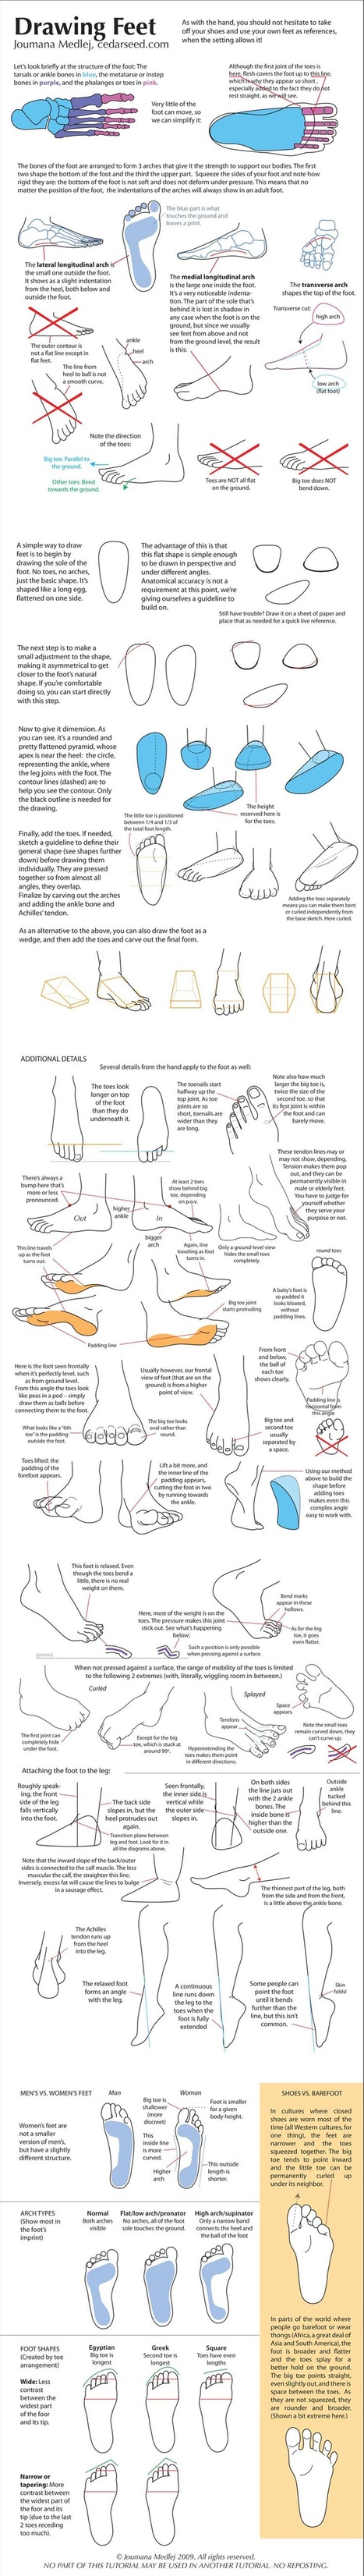 Feet Drawing Reference Guide | Drawing References and Resources | Scoop.it